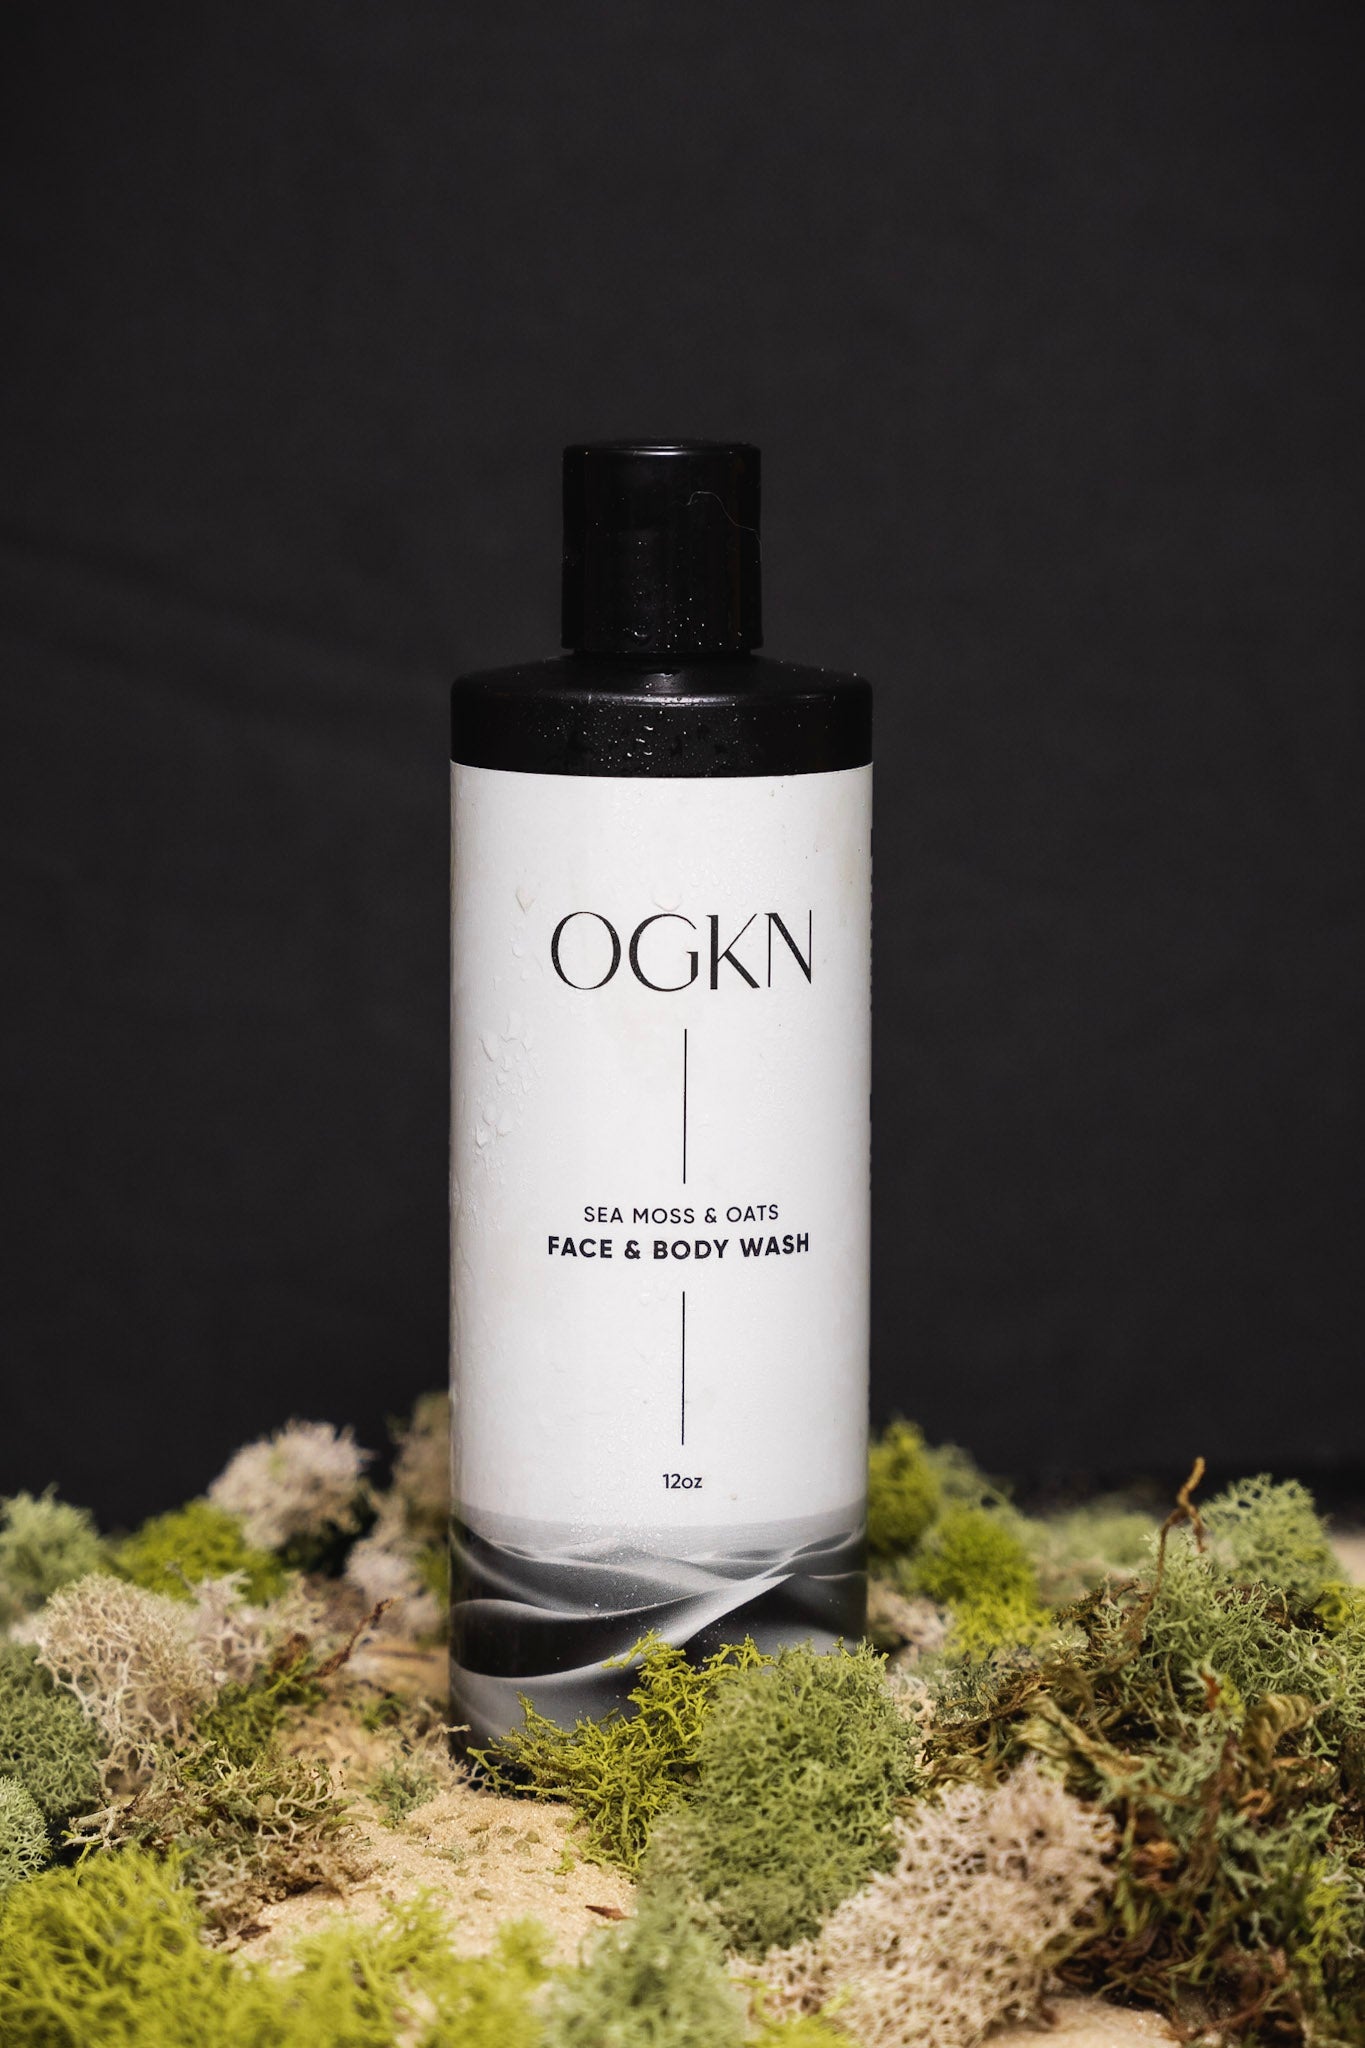 Premium Sea Moss & Oats Face and Body Wash | The OGKN